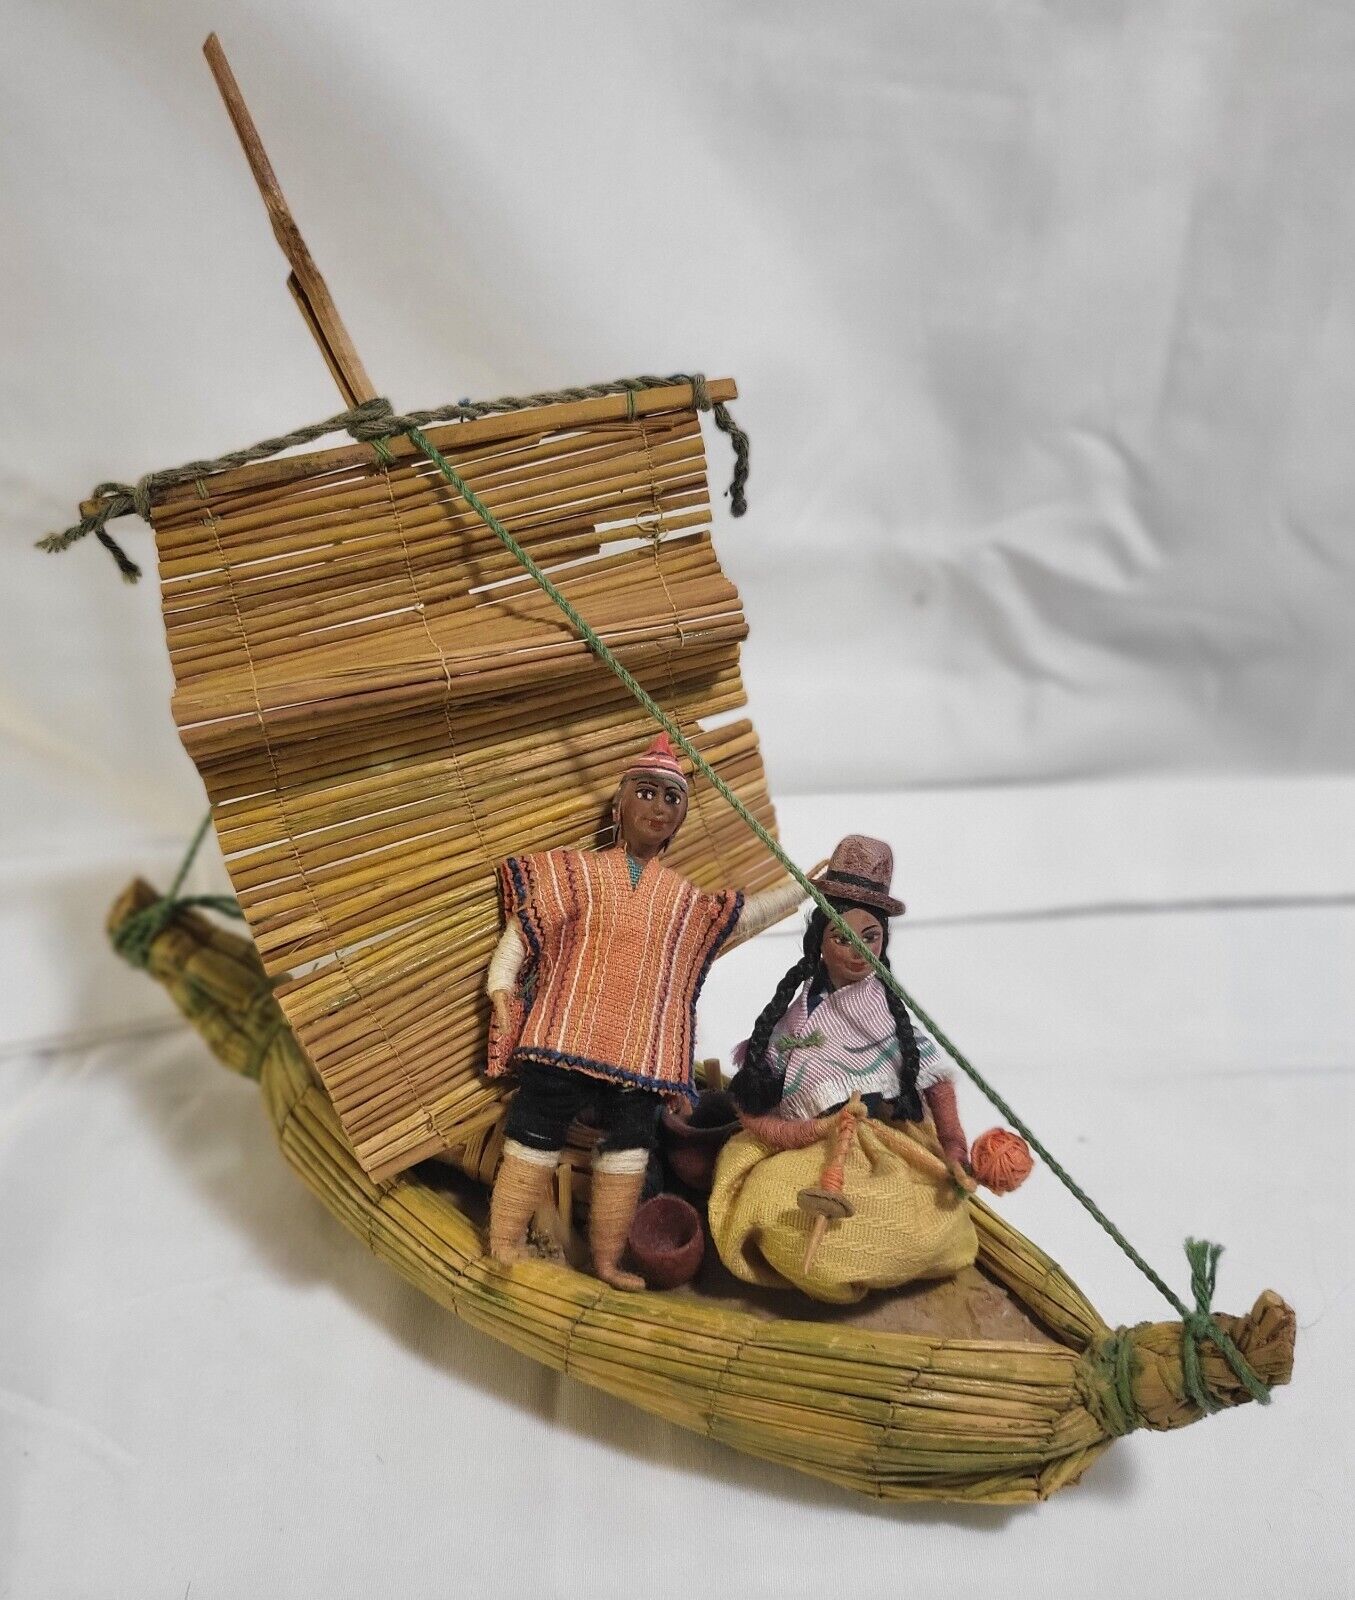 Vintage South American Hand-Crafted Reed Wicker Boat People Bolivian